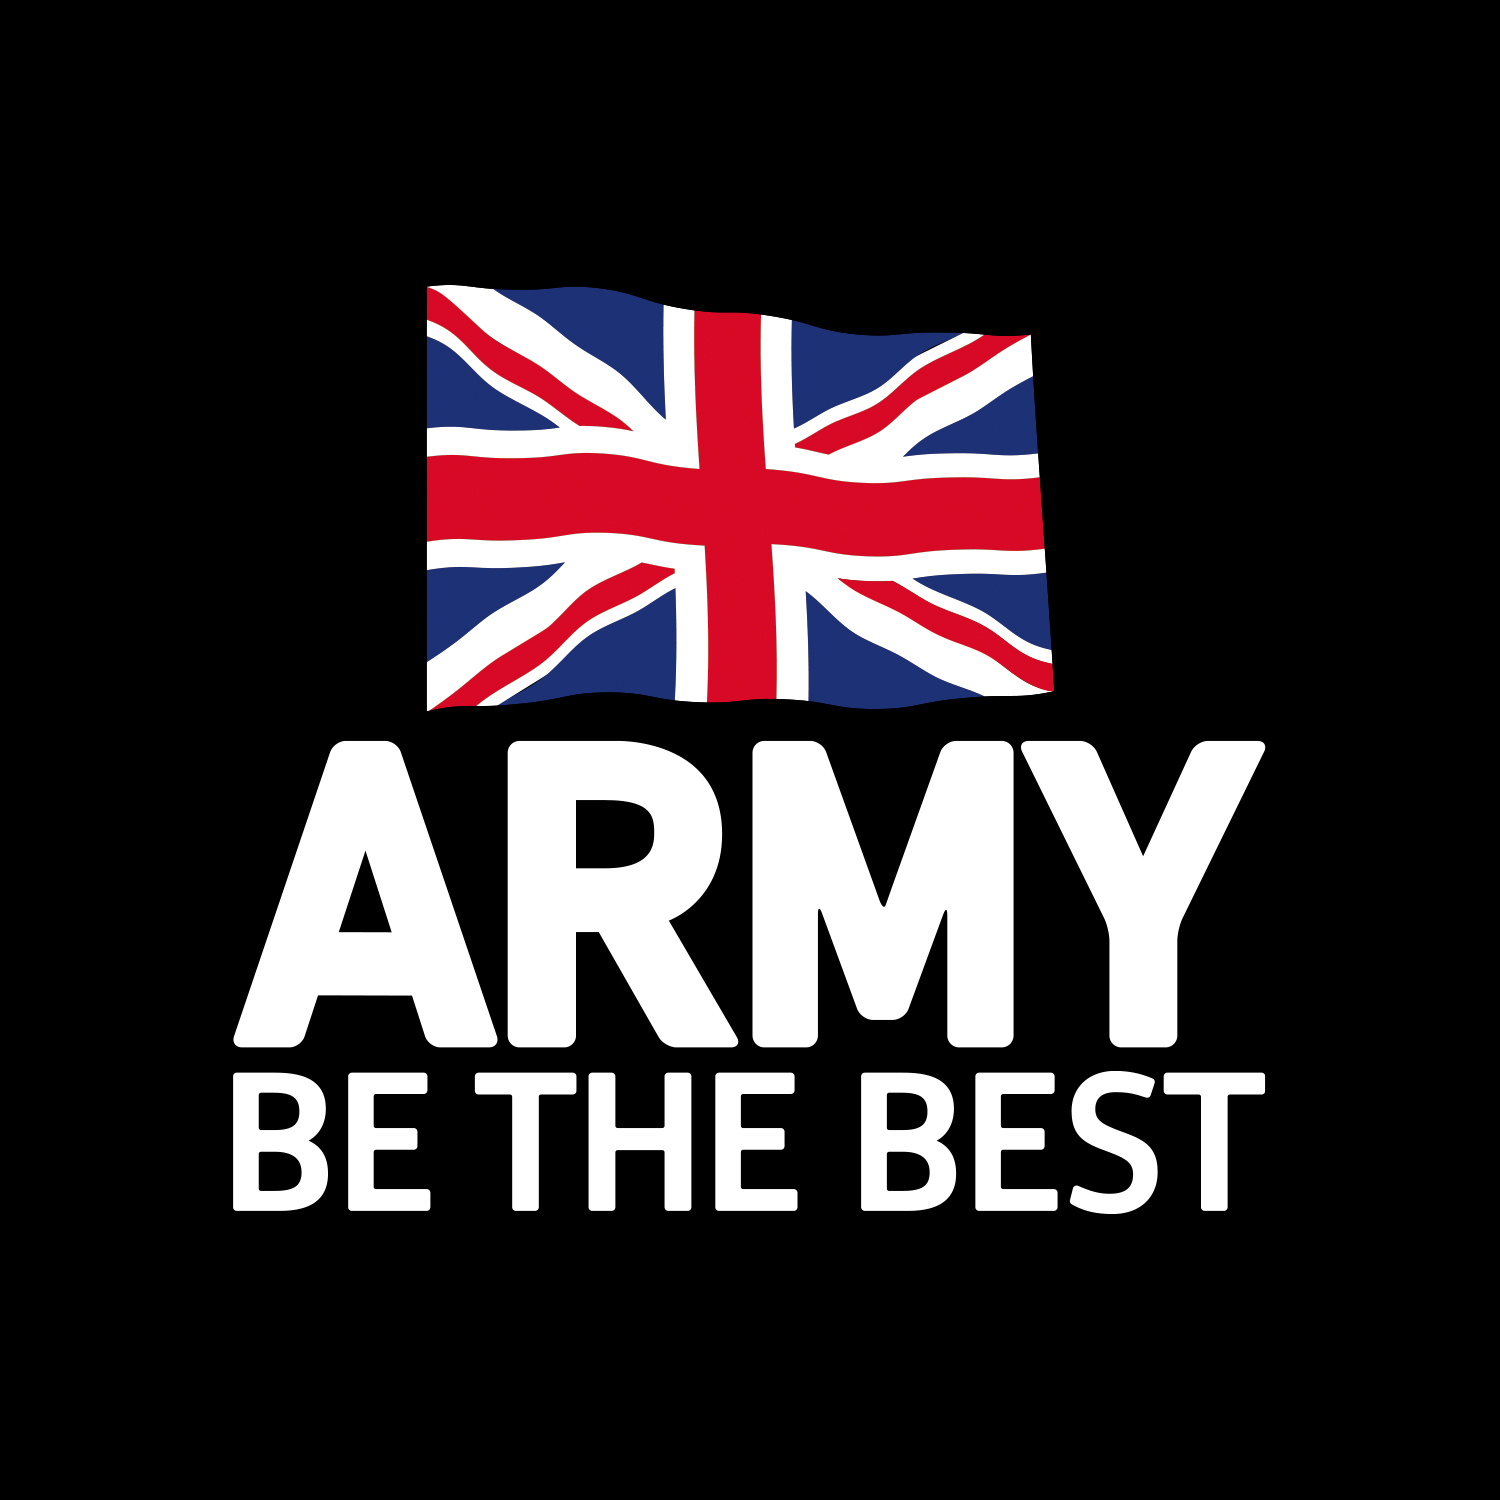 The British Army's Podcast